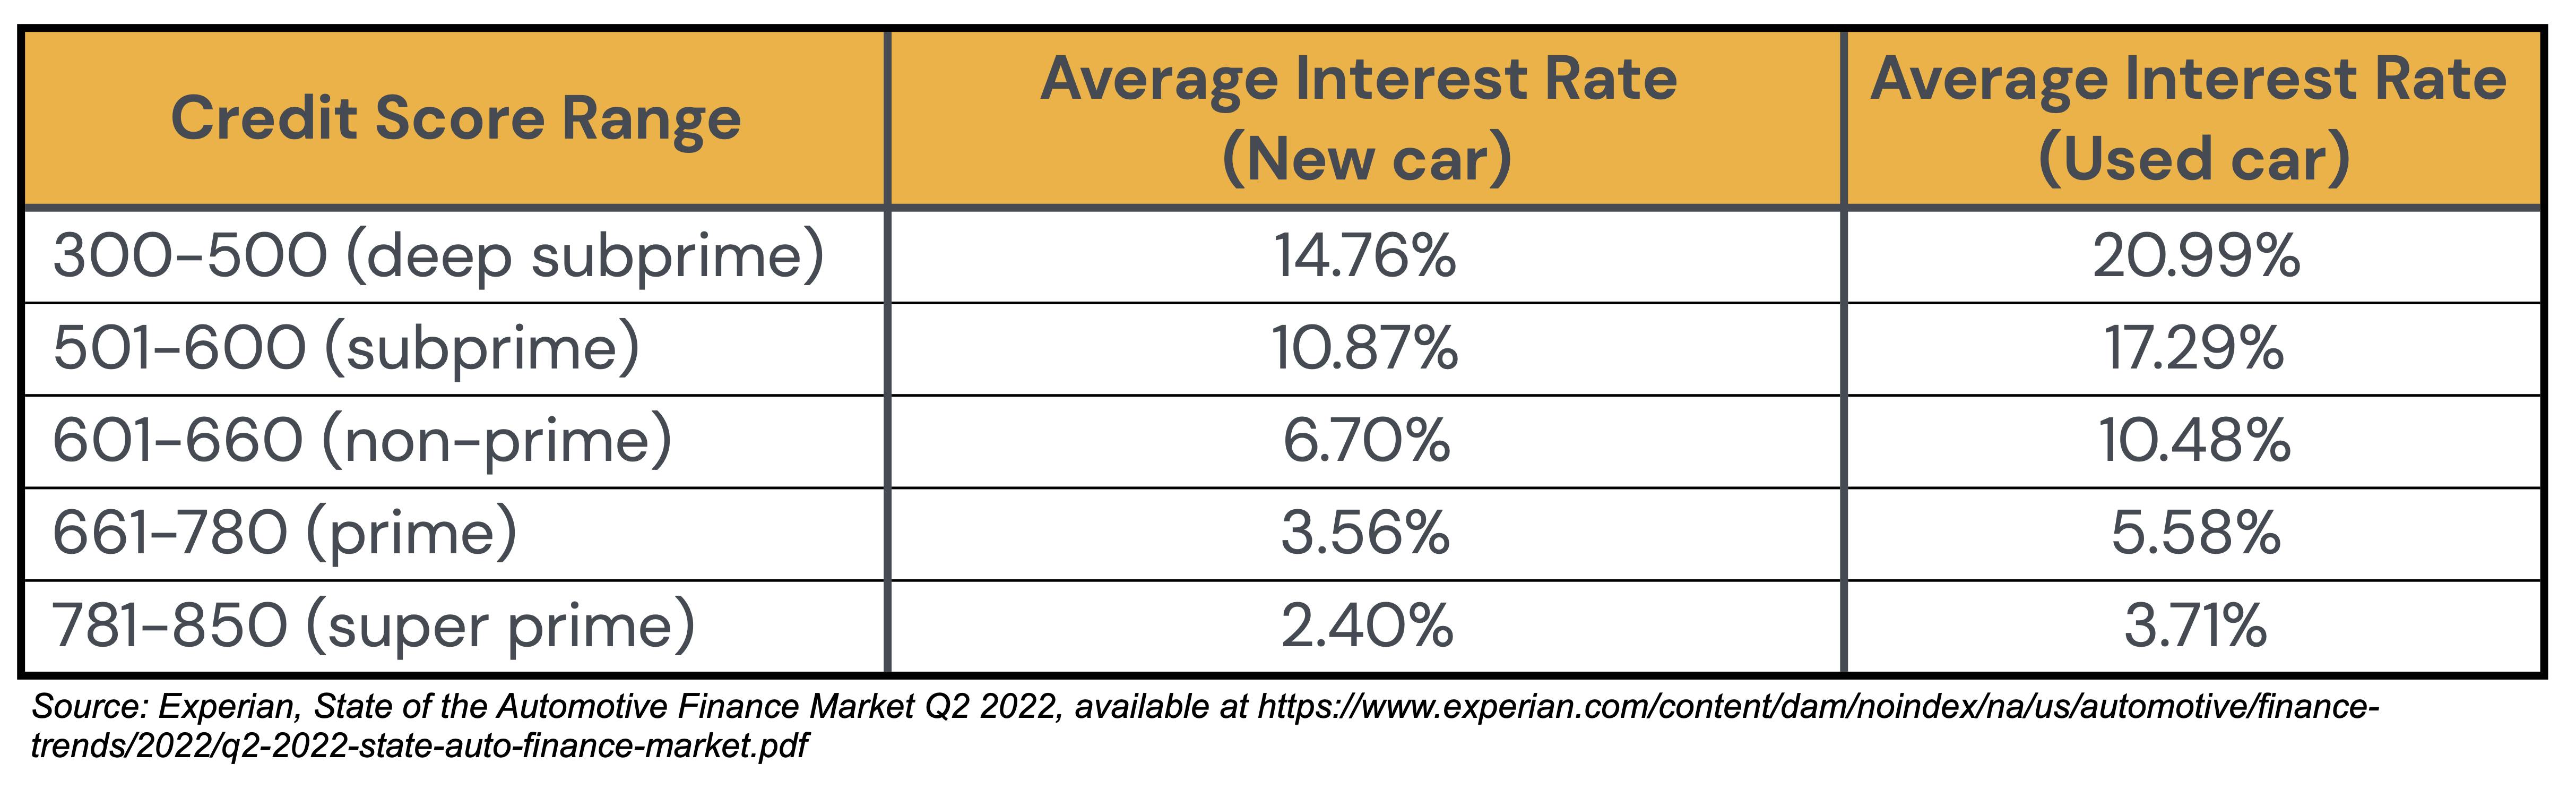 Average interest rates by credit score range as reported by Experian's State of the Automotive Finance Market Report Q2 2022